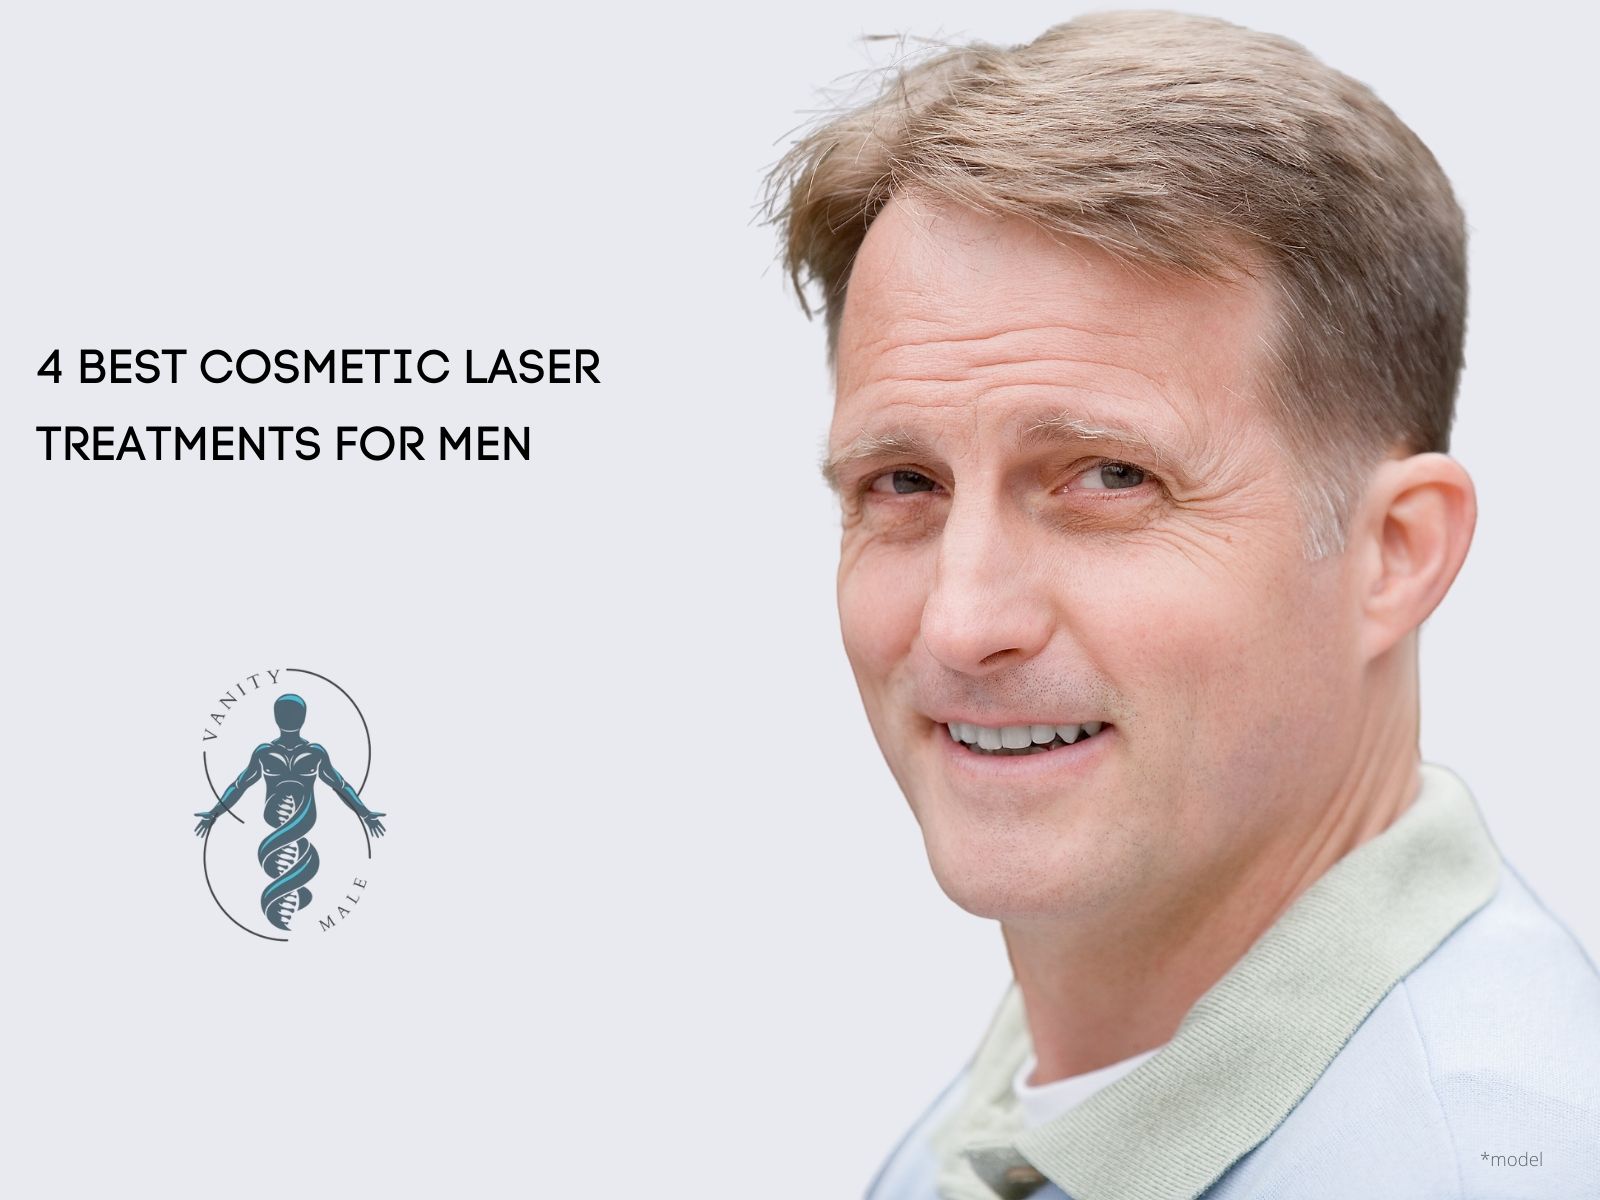 Cosmetic Laser Treatments for Men in Teaneck, NJ